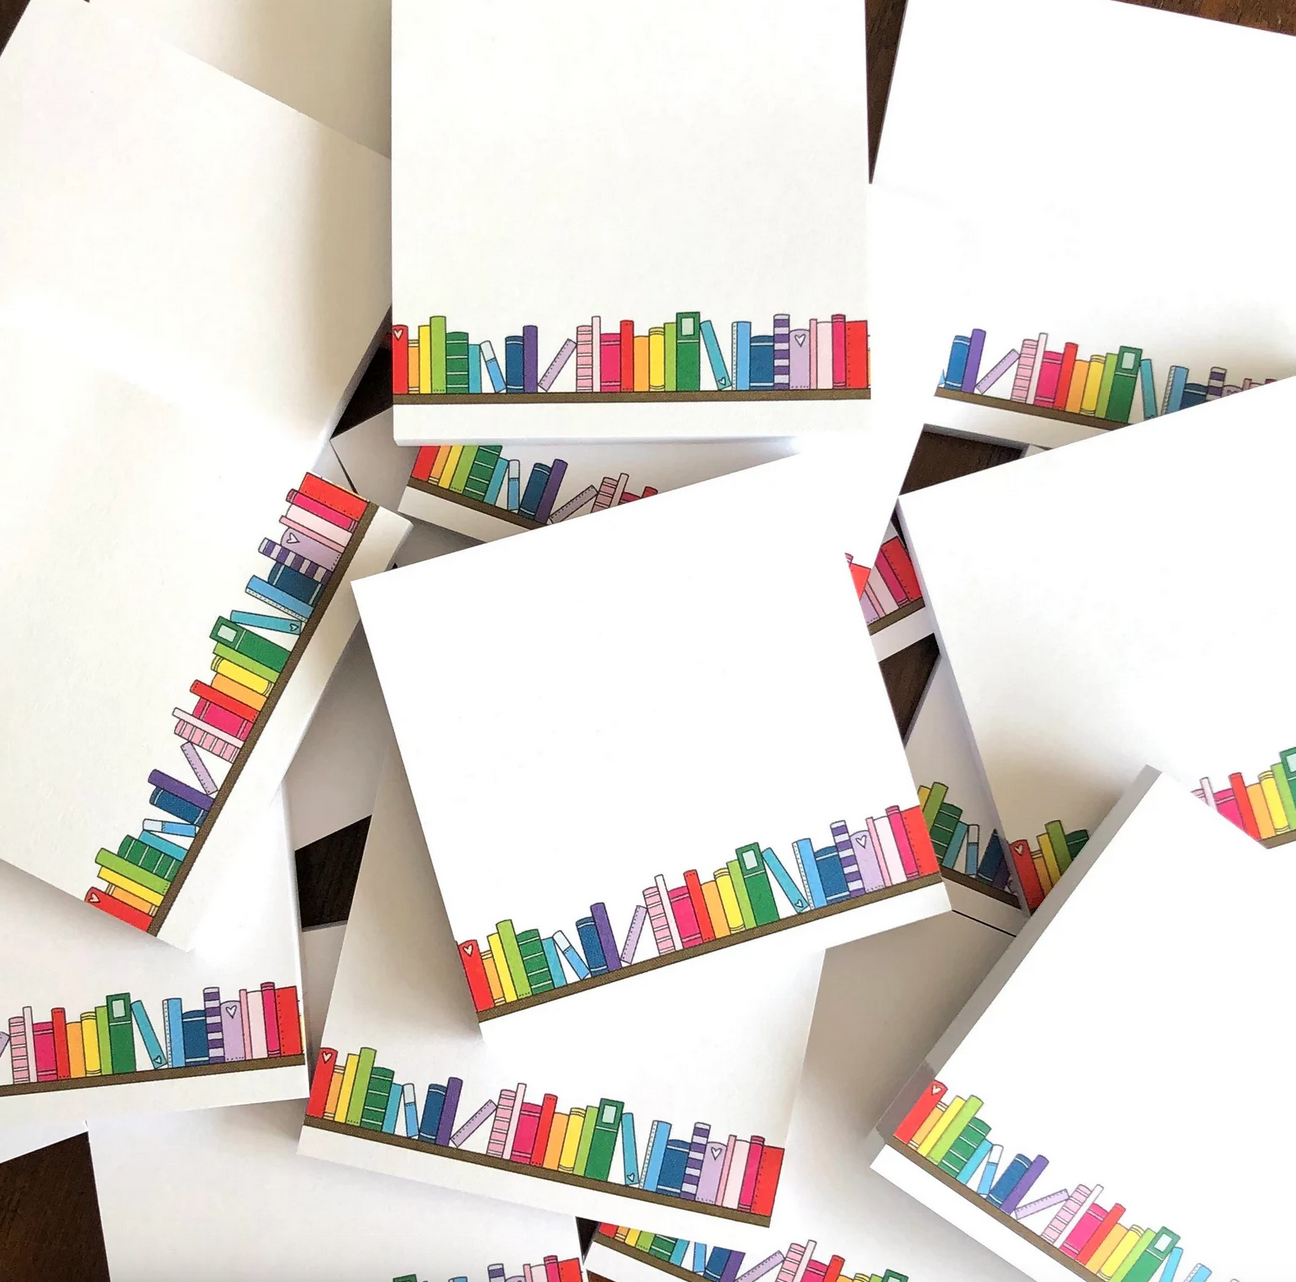 Pile of sticky note pads with colorful book graphics